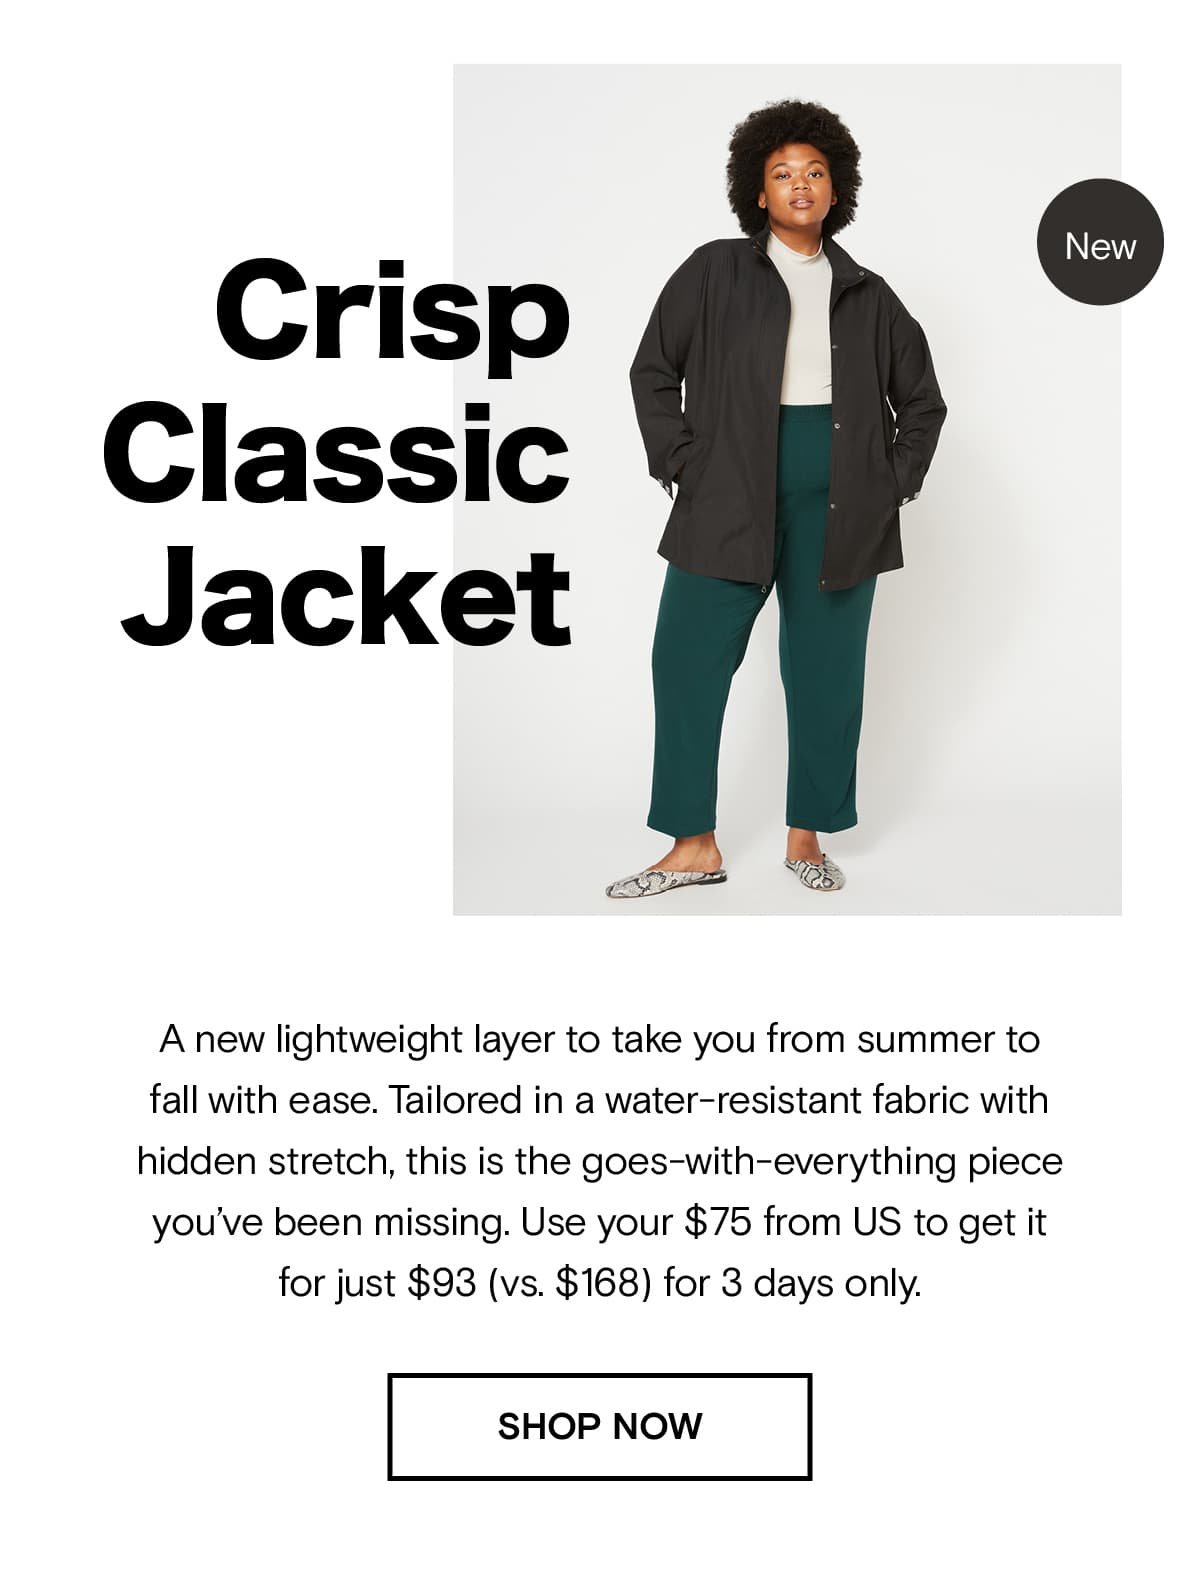 A new lightweight layer to take you from summer to fall with ease. Tailored in a water-resistant fabric with hidden stretch, this is the goes-with-everything piece you've been missing. Use your $75 from US to get it for just $93 (vs. $168) for 3 days only.